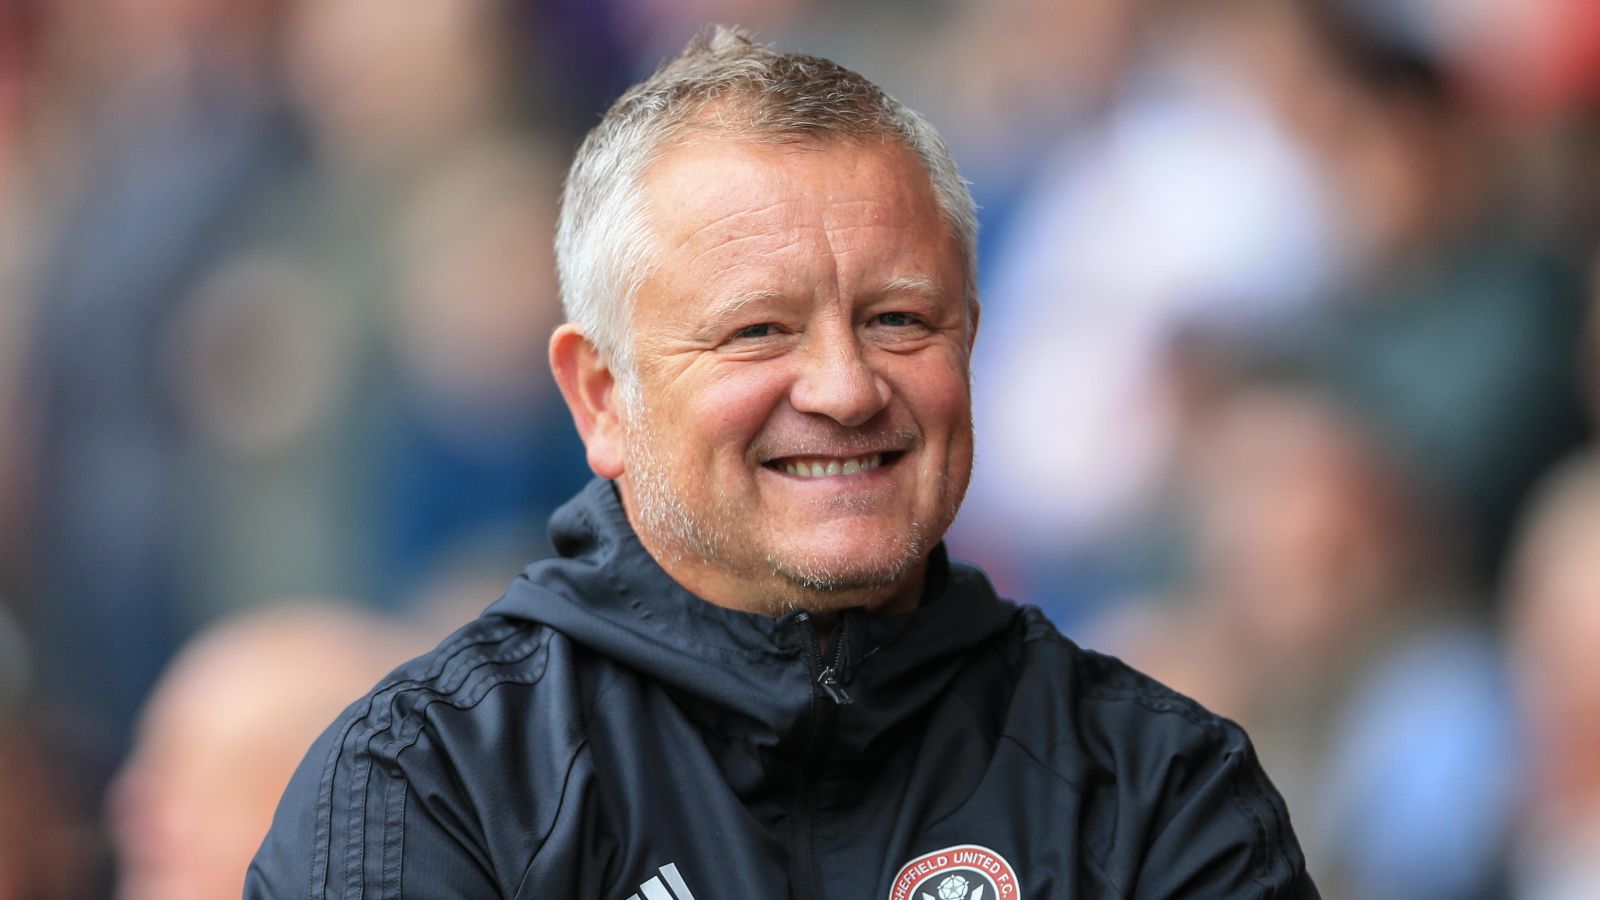 GREAT NEWS: Sheffield United top midfielder that went on injury suspension is back…